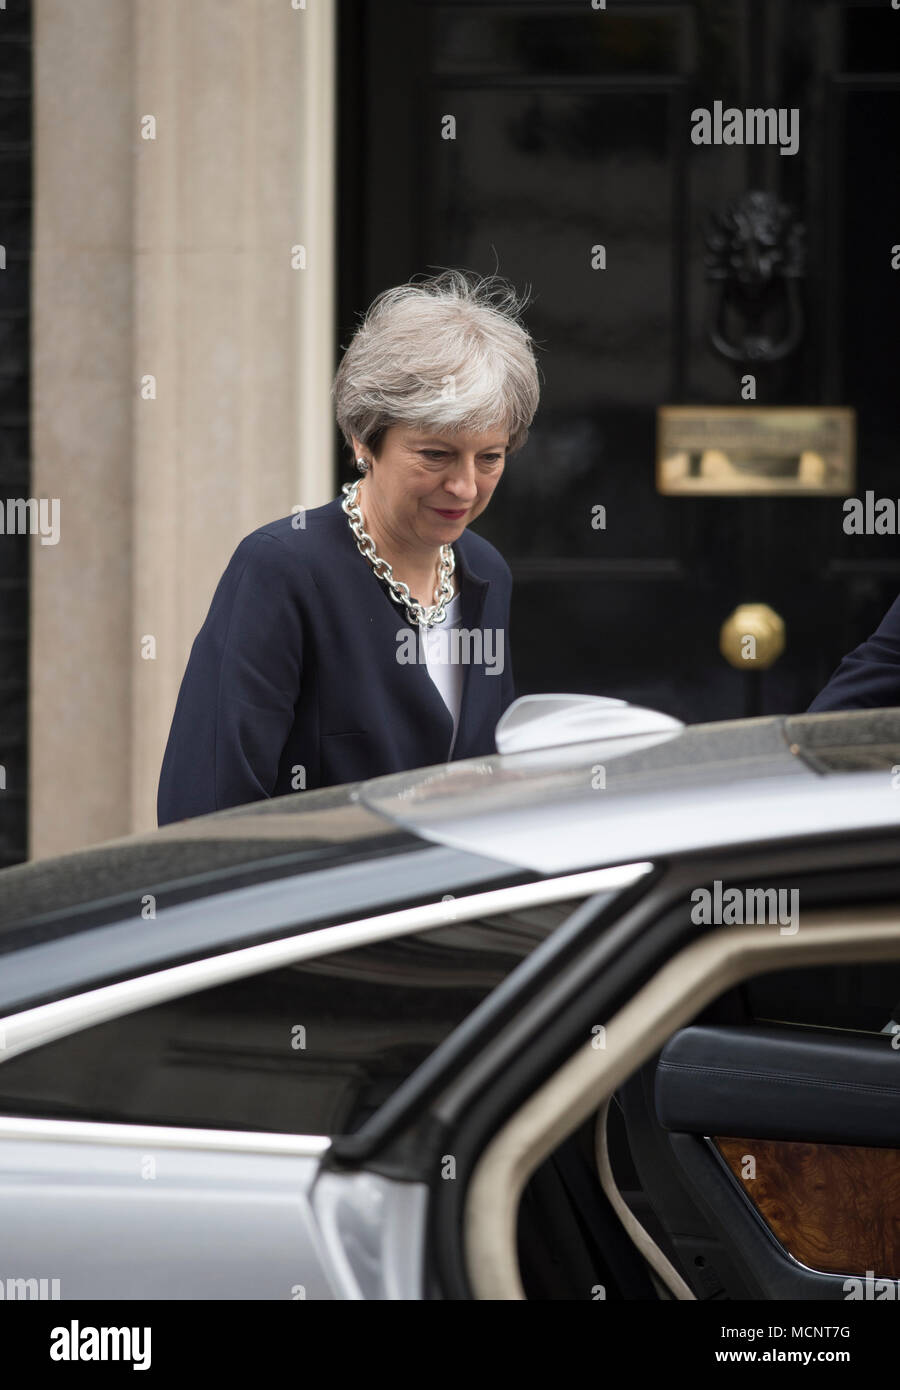 Downing Street, London, UK. 17th April, 2018. Prime Minister Theresa May leaves 10 Downing Street after meeting Commonwealth leaders and foreign ministers before the start of the Commonwealth Heads of Government summit in London. Credit: Malcolm Park/Alamy Live News. Stock Photo